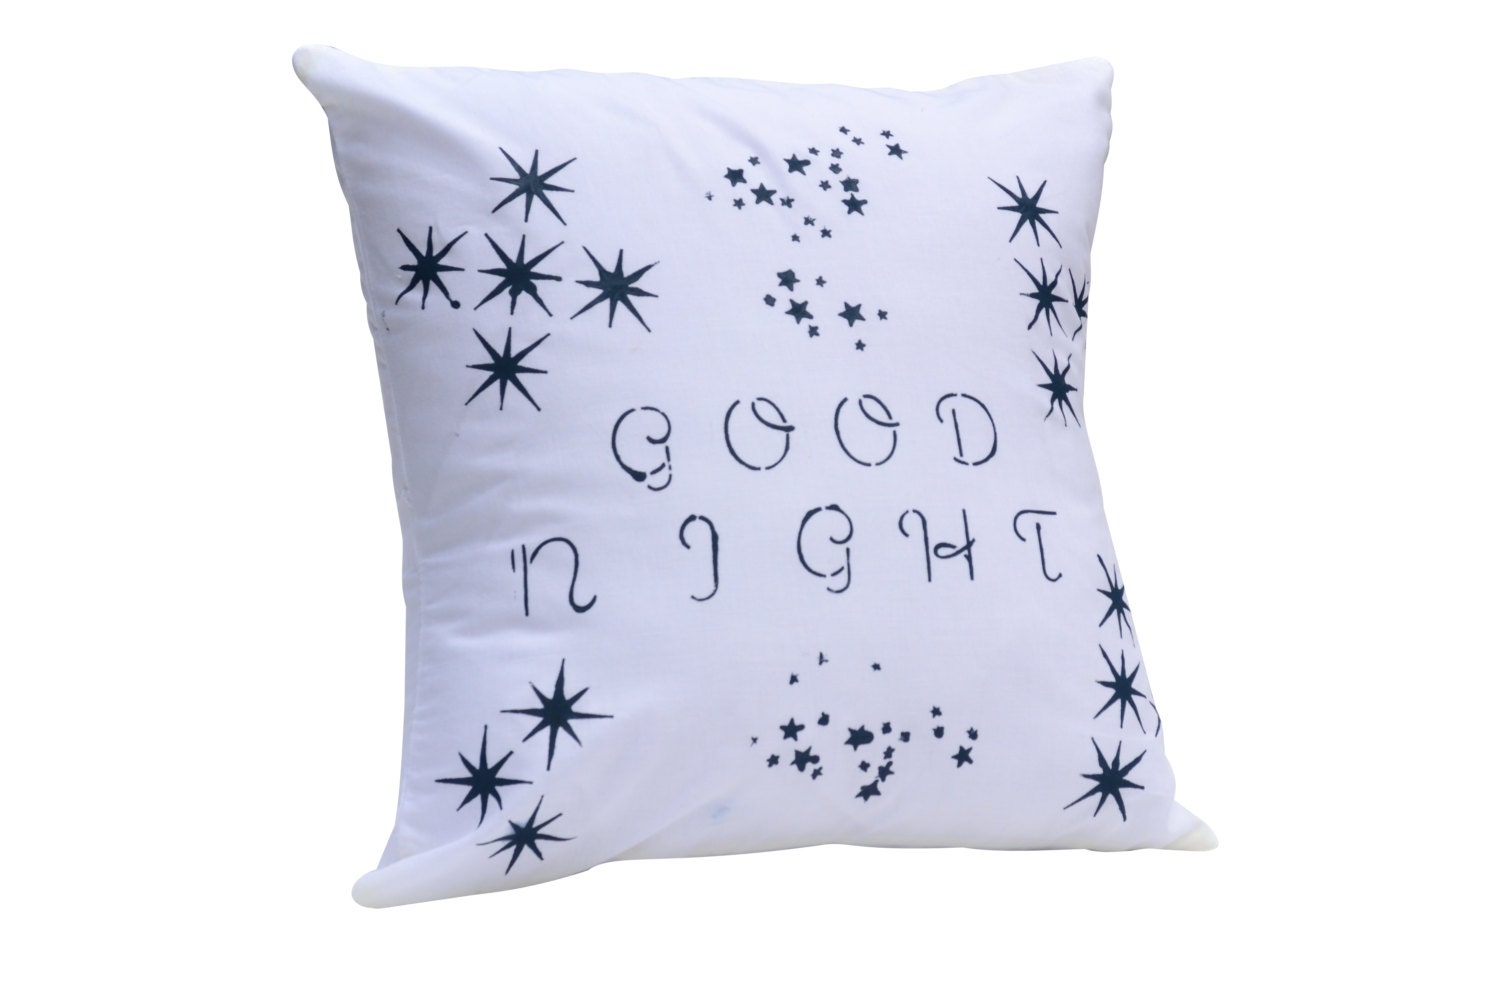 Good Night Hand painted Accent Pillow 16x16 - vlady1